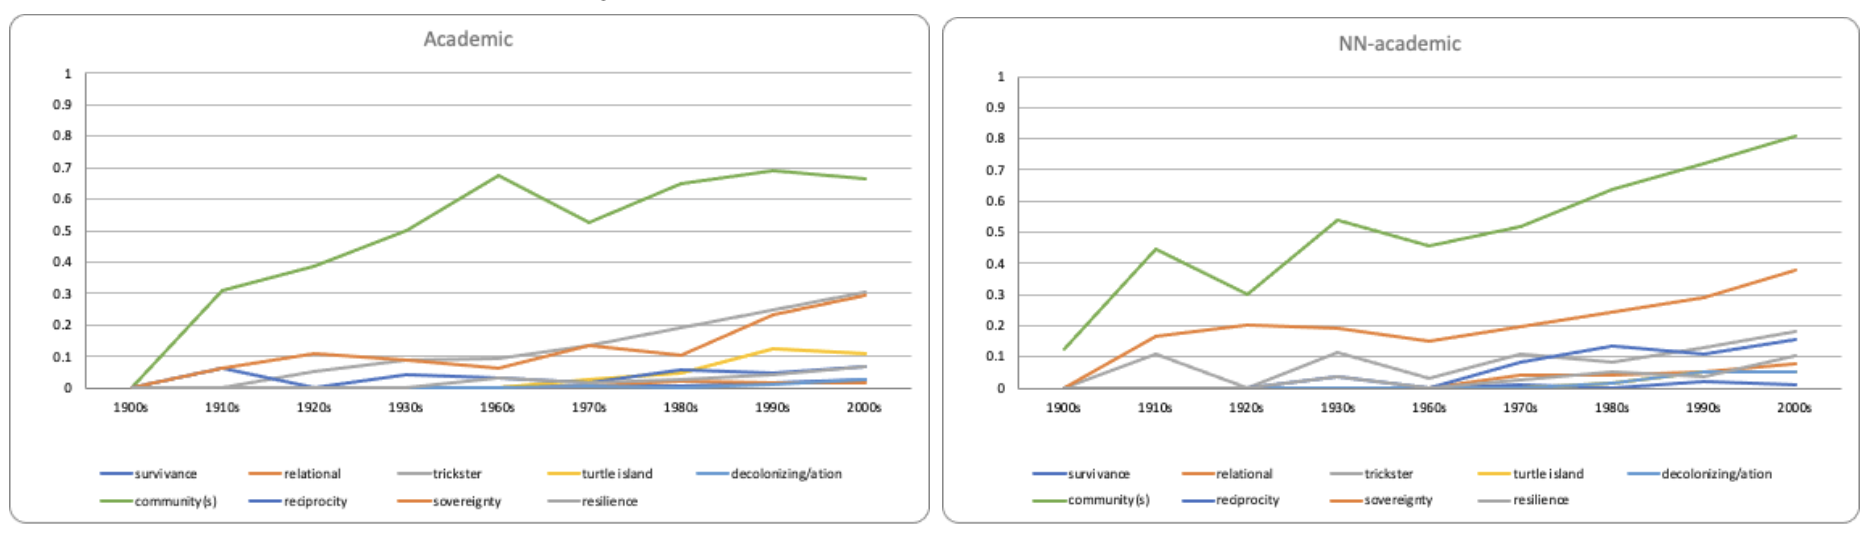 Academic terms usage between the worksets (Left picture shows the term usage of the Native-authored workset, and right picture shows the term usage of the comparative workset).